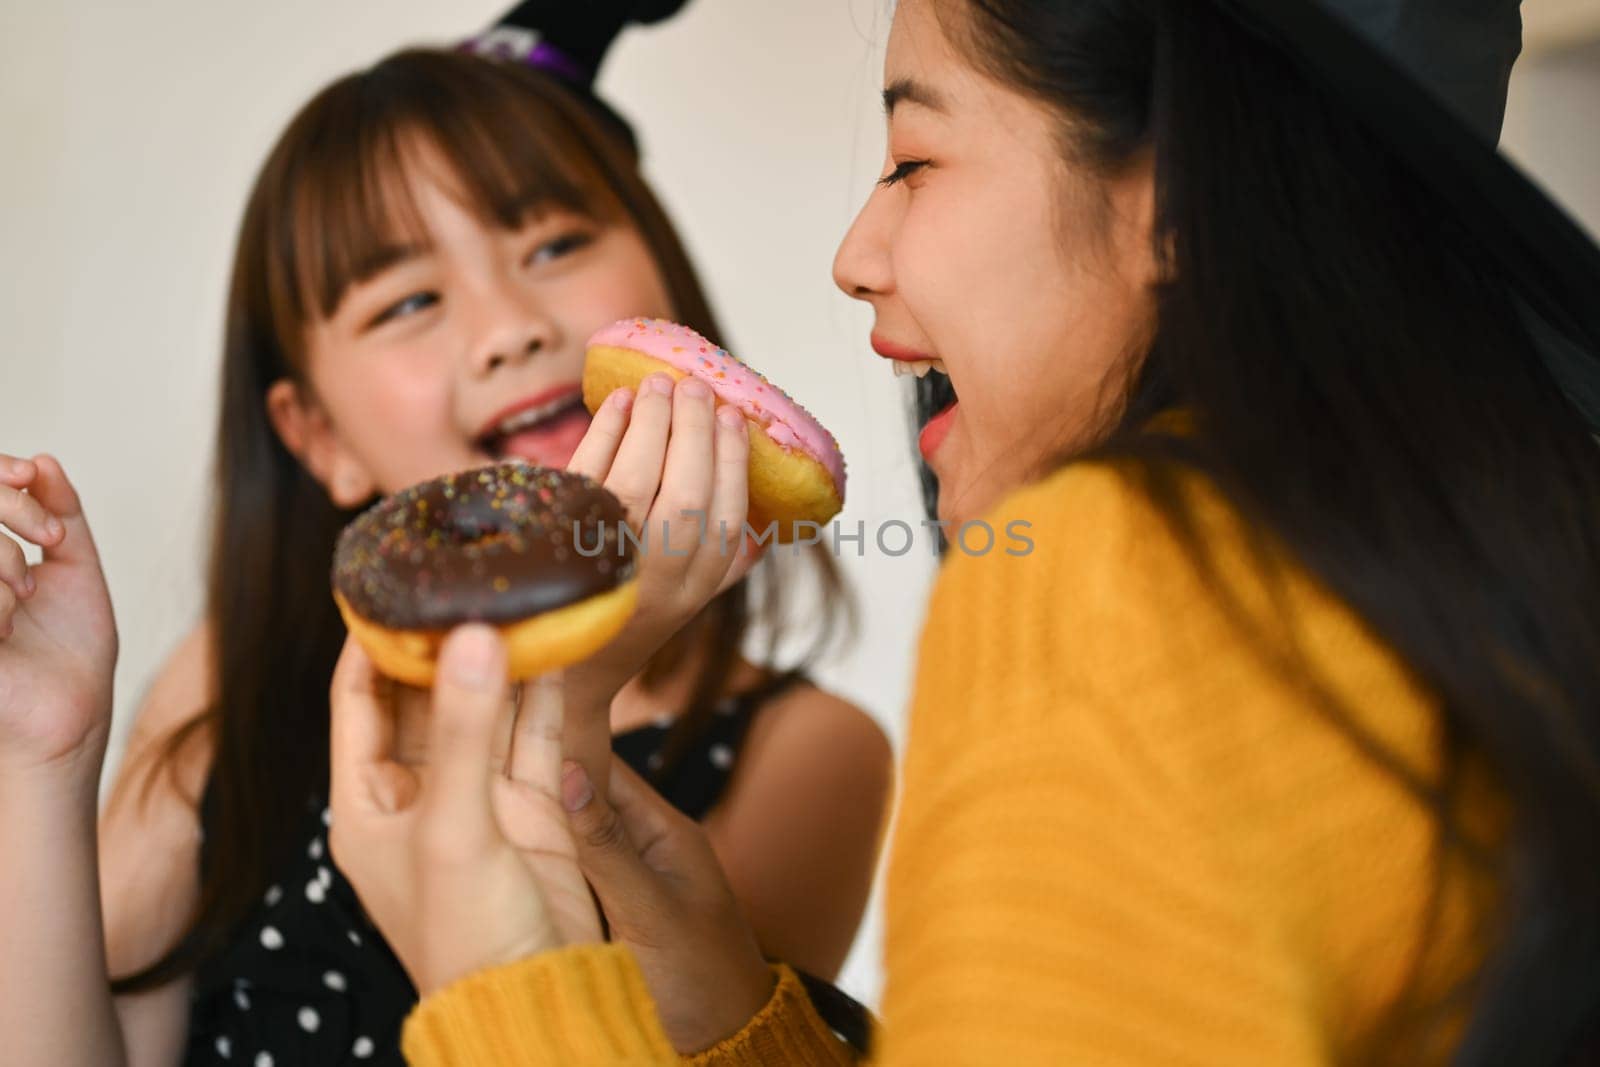 Happy family, cute little girl eating sweet donut with mother in kitchen. Halloween celebration and activity relationship in house.